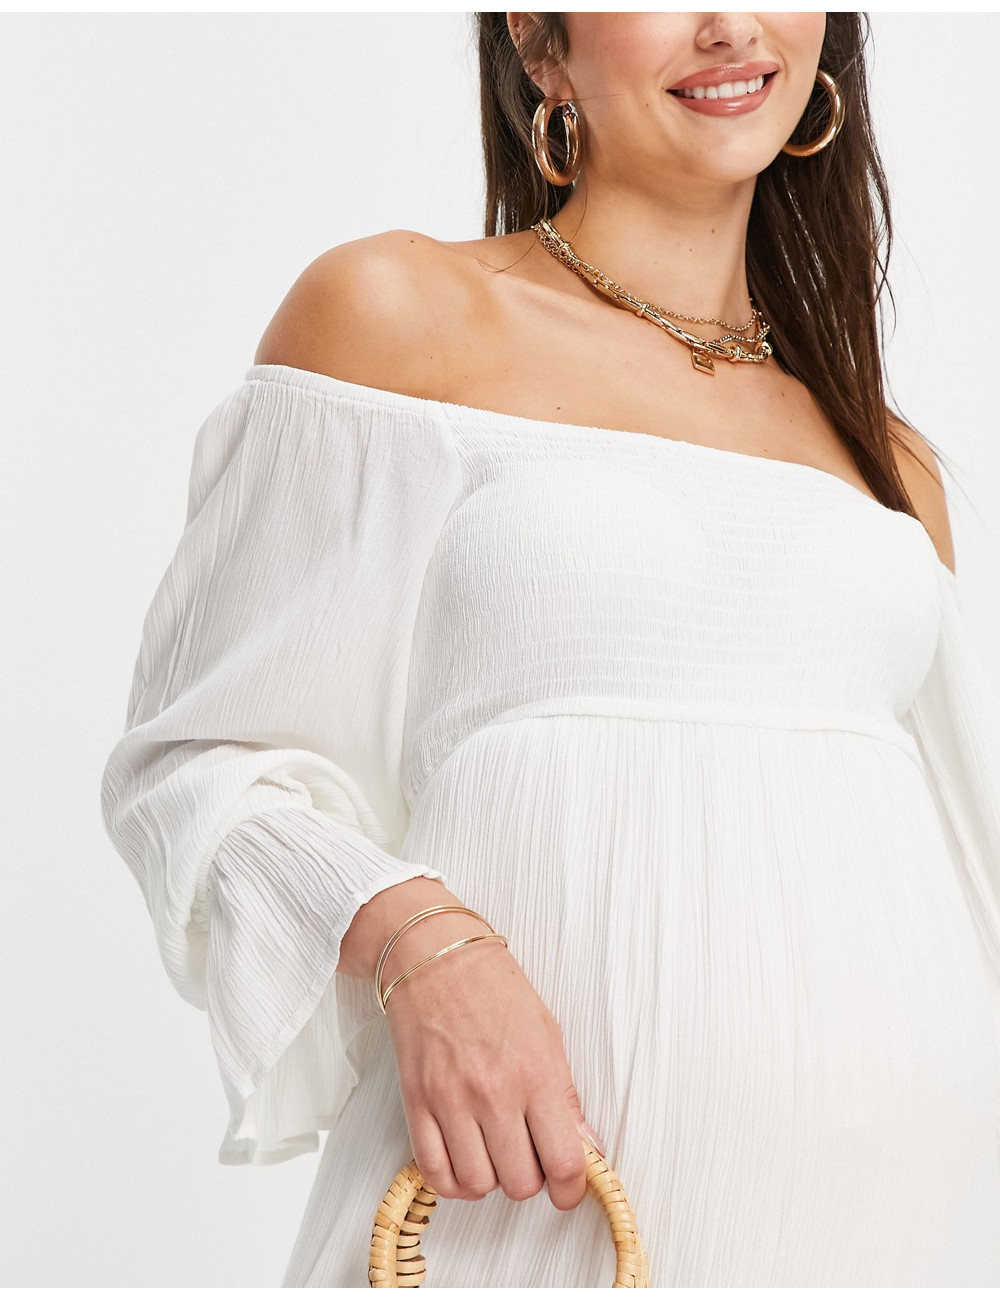 In The Style Maternity x...